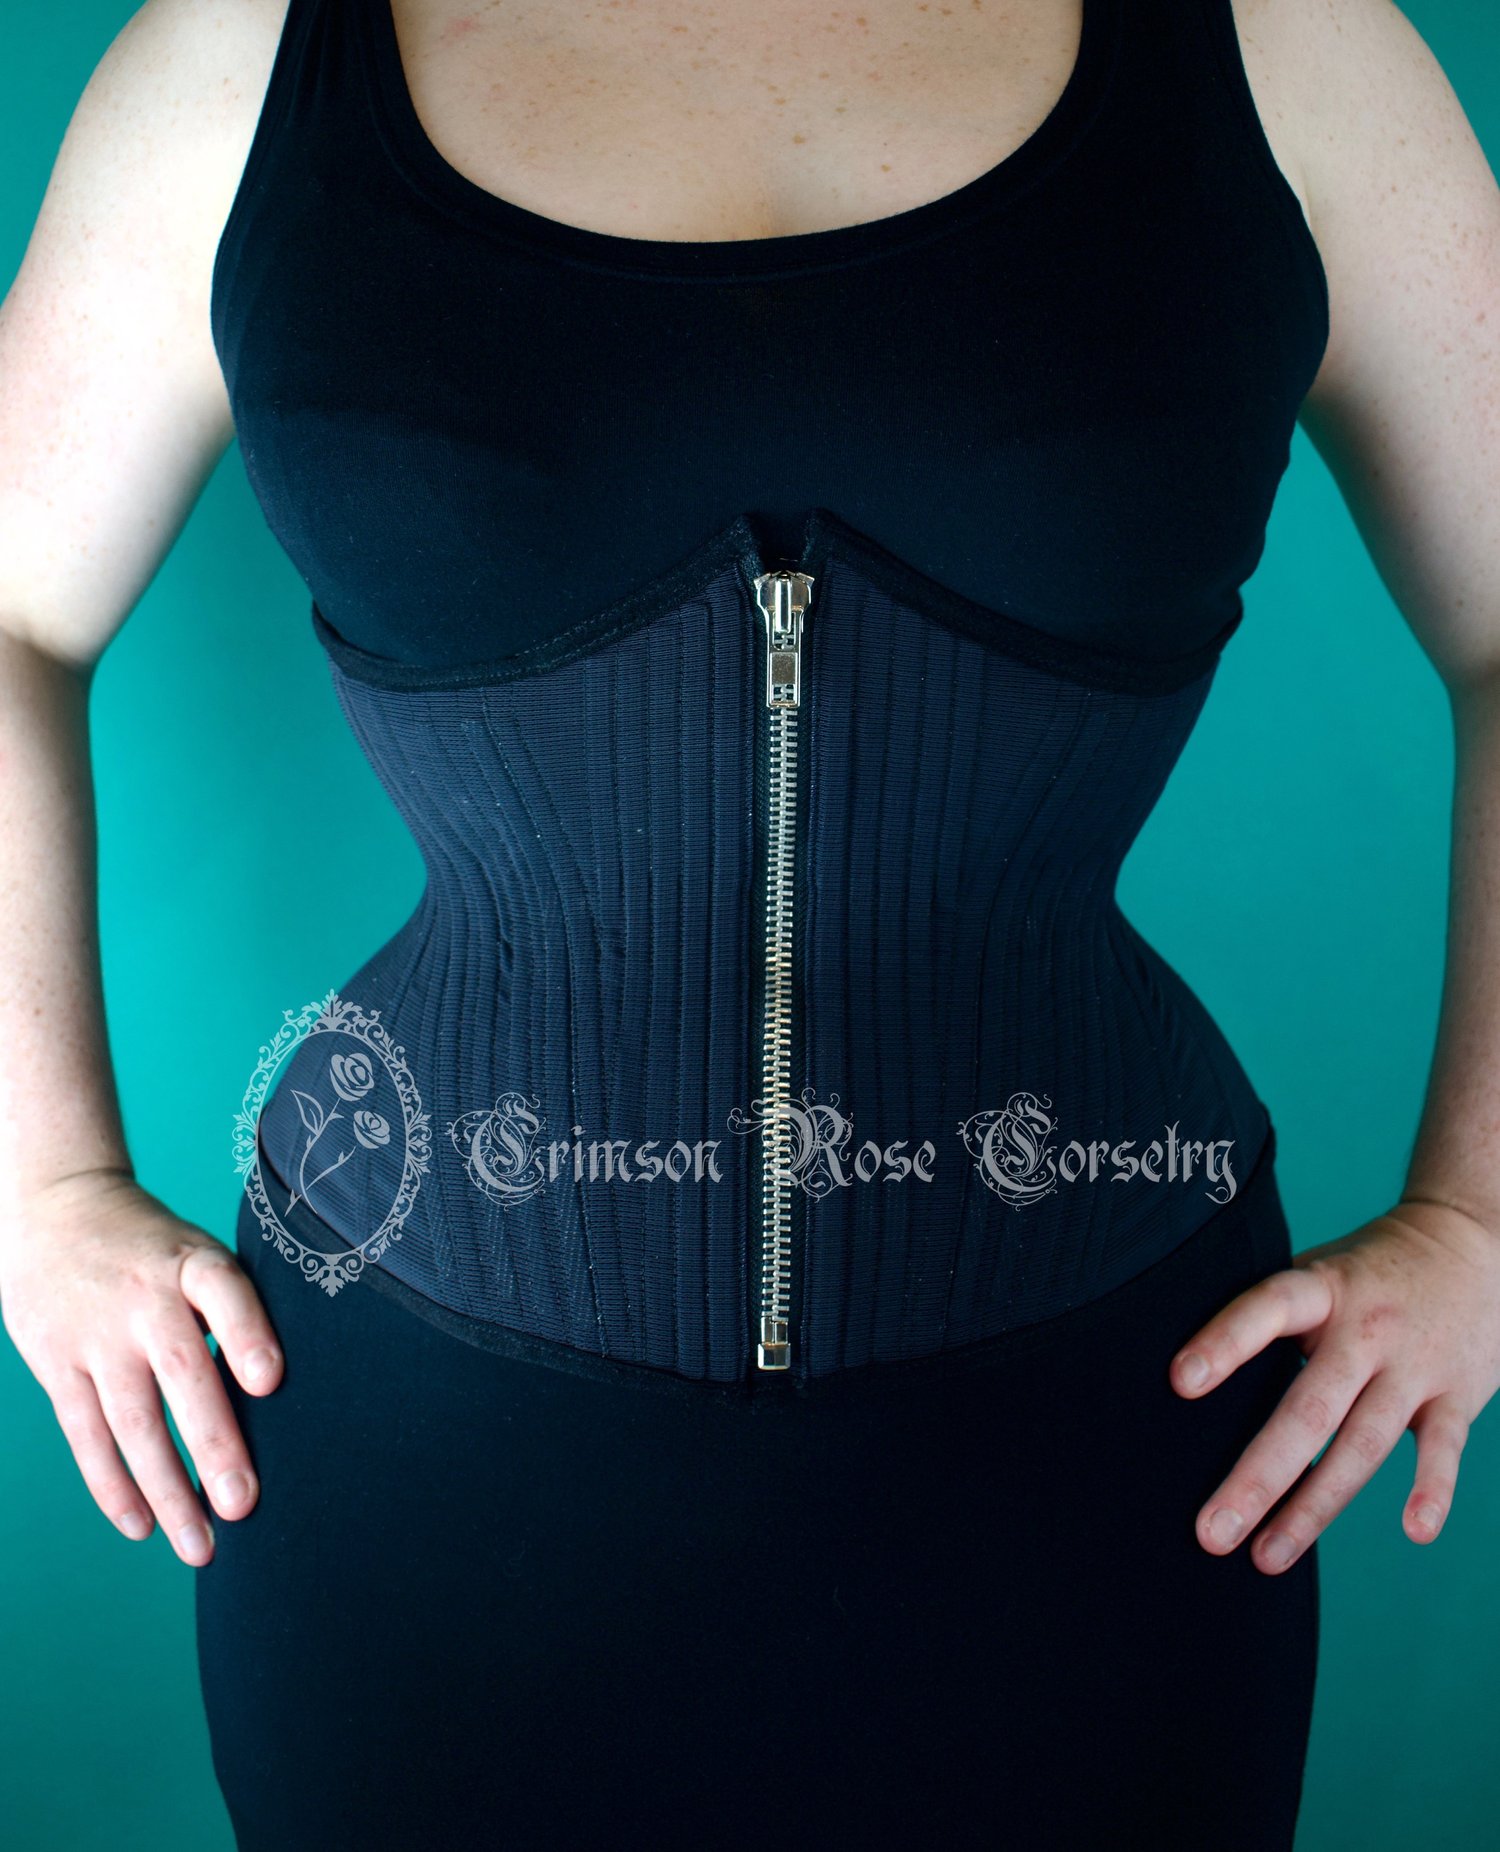 Finally got to try the #powercorset on a larger size than me! I